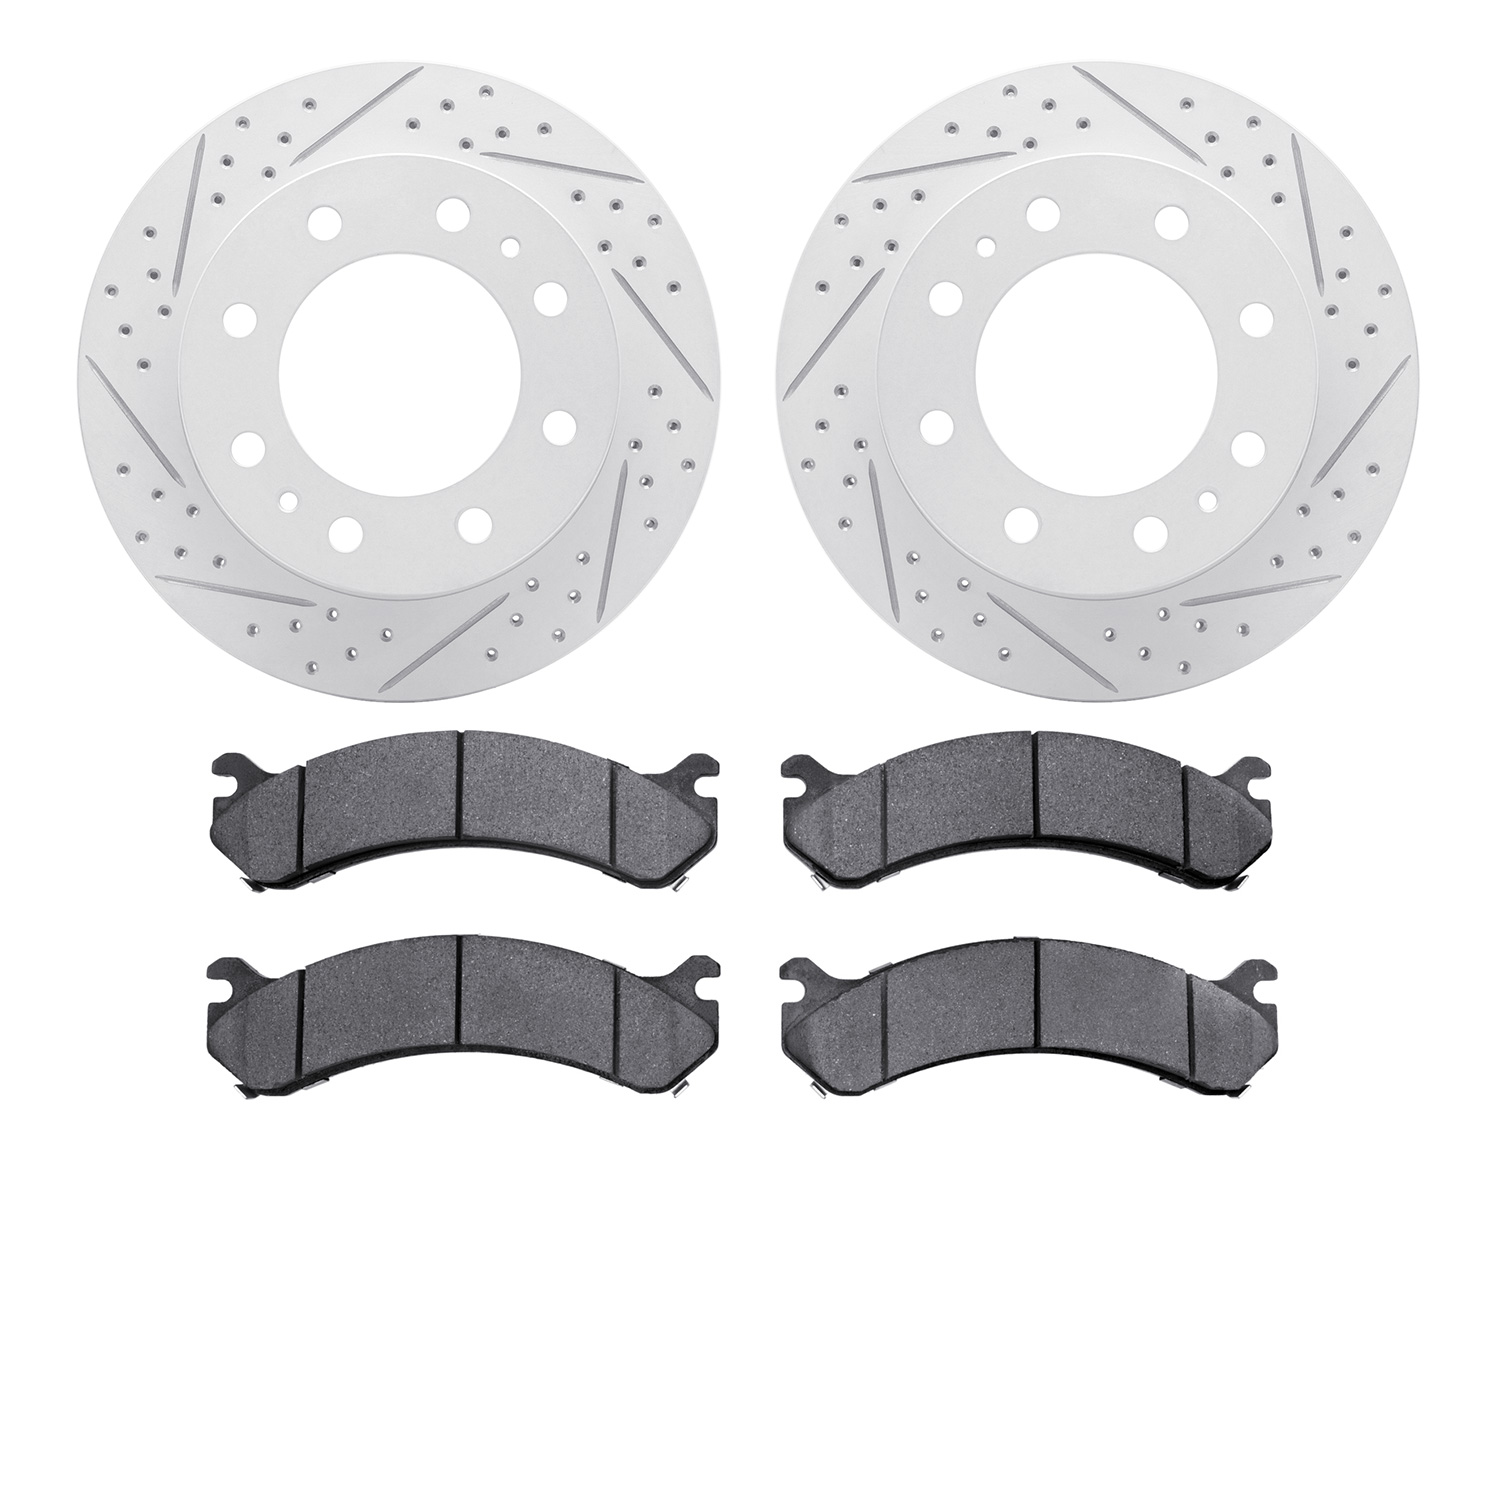 2402-48024 Geoperformance Drilled/Slotted Brake Rotors with Ultimate-Duty Brake Pads Kit, 2001-2020 GM, Position: Front